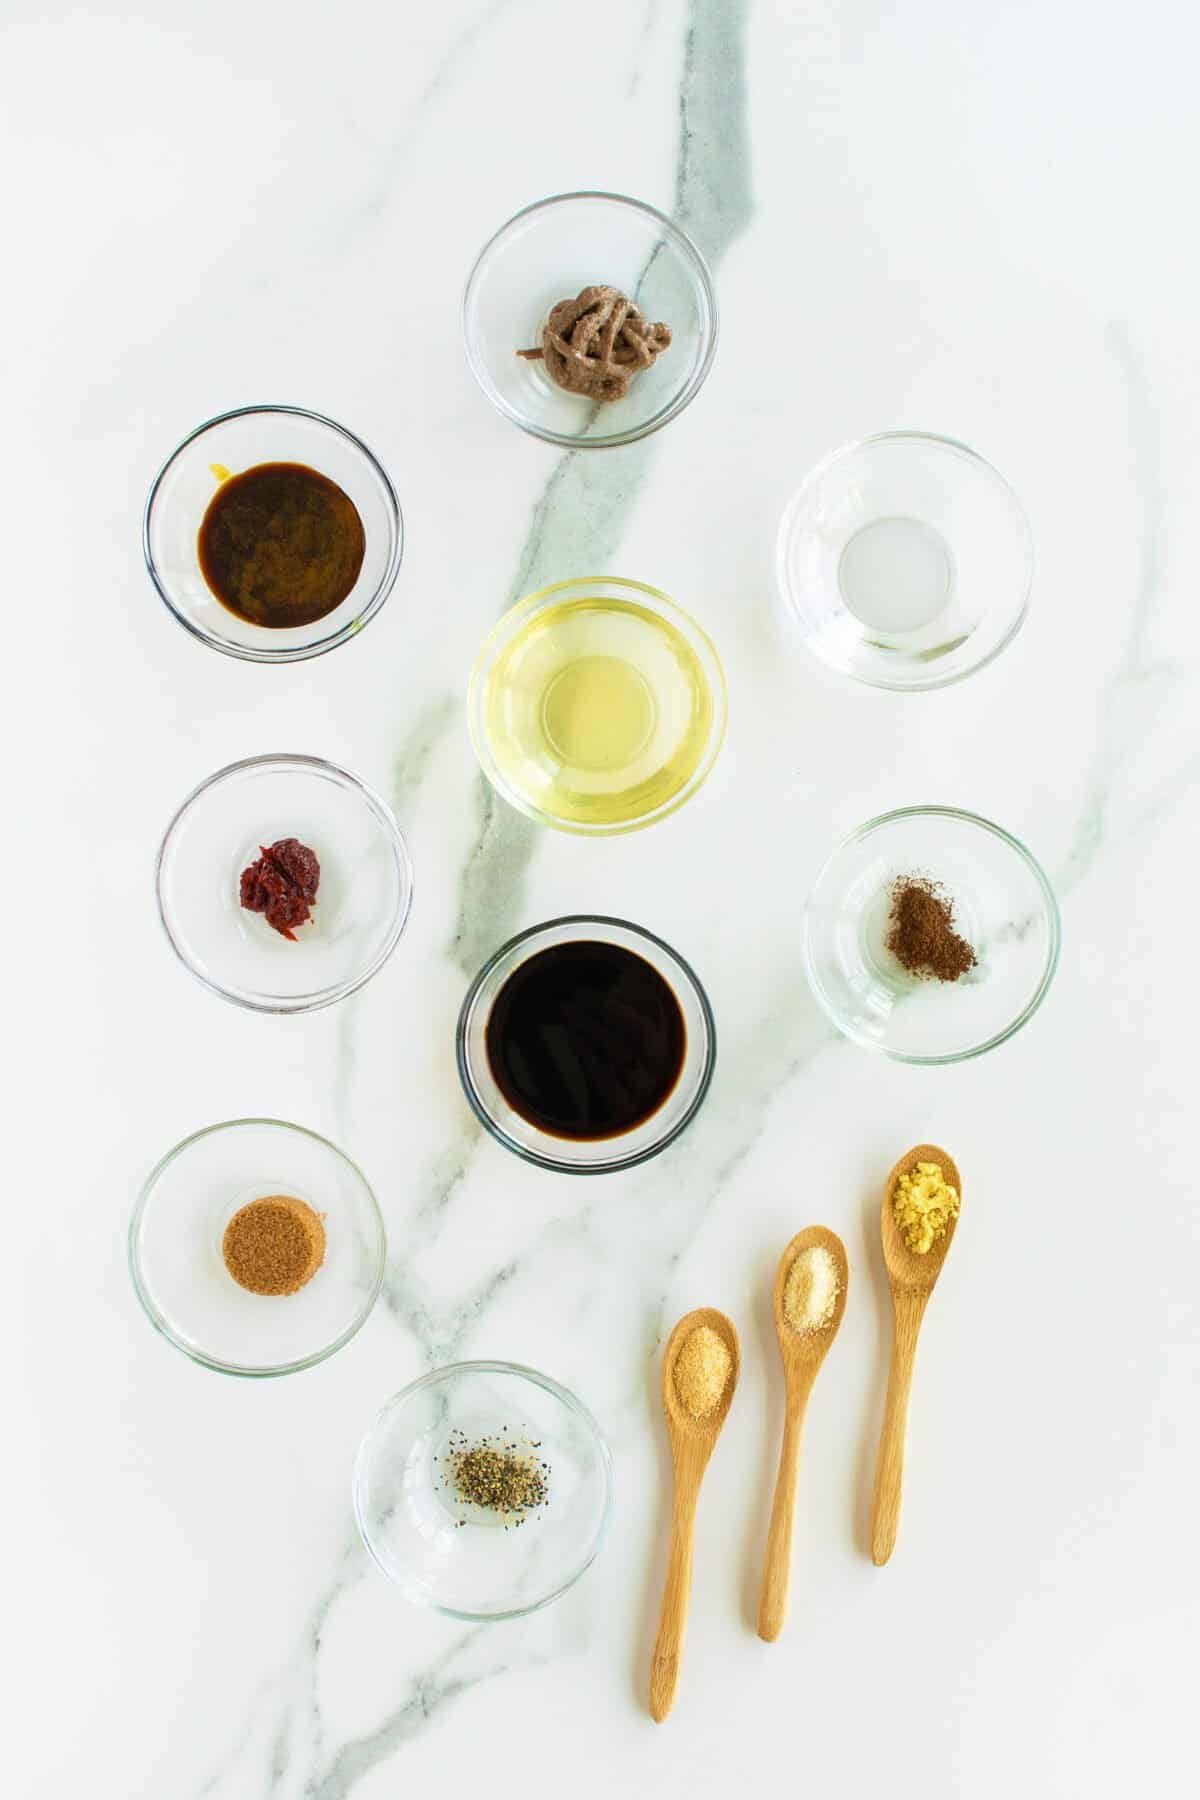 Homemade Worcestershire Sauce ingredients in clear bowls and spoons